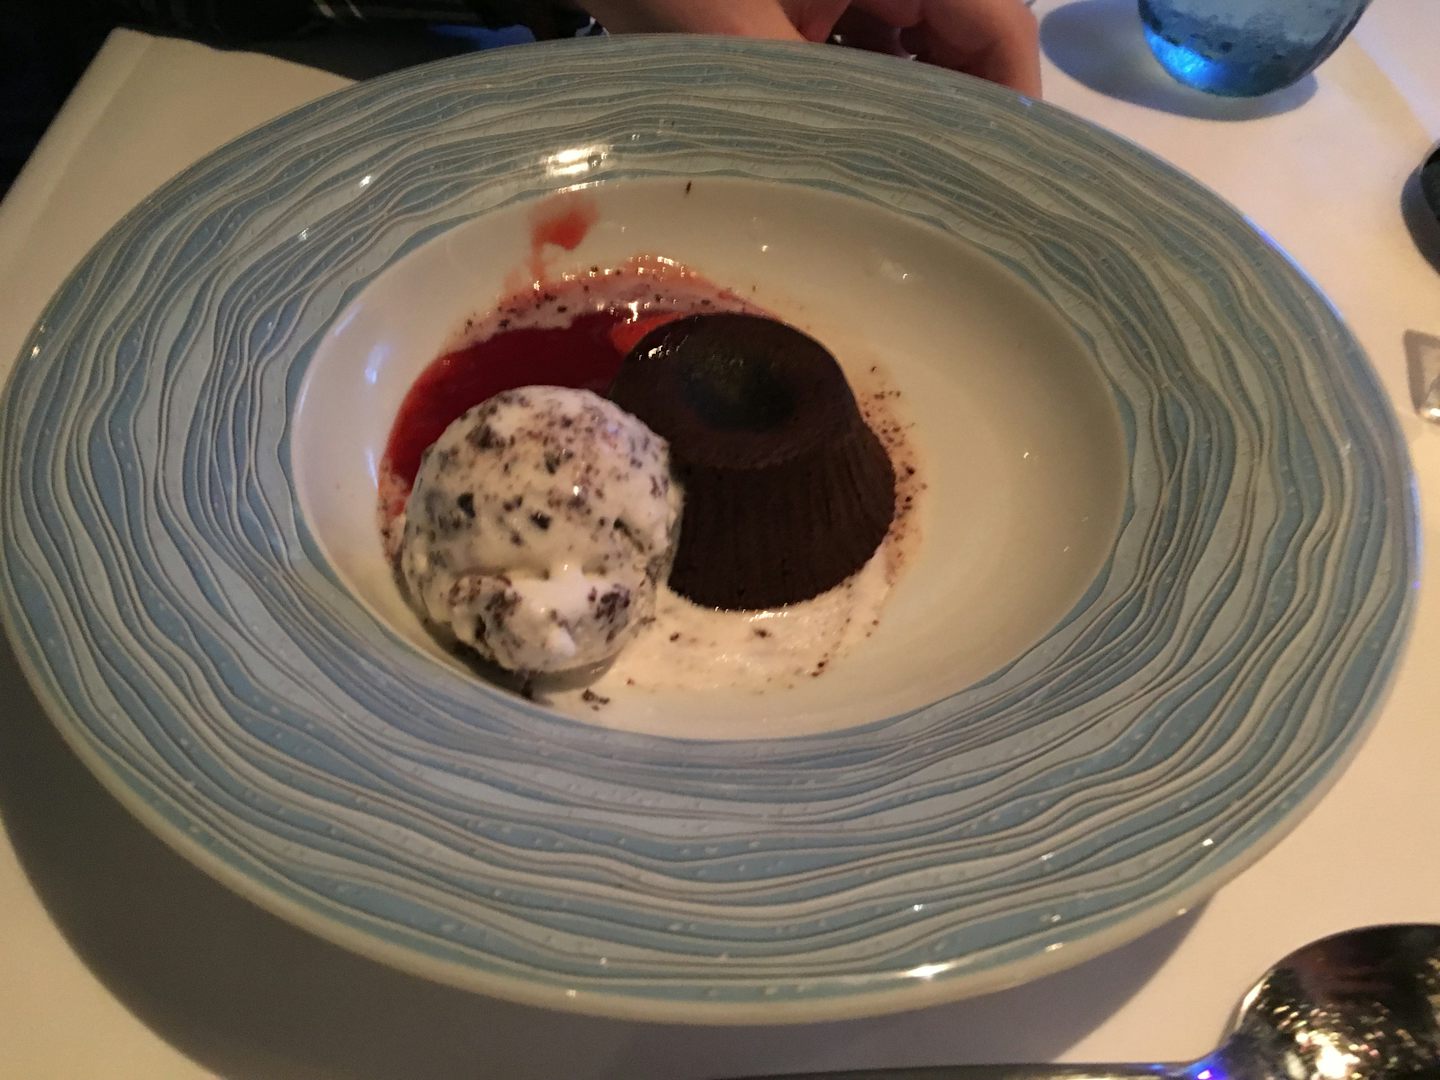 Lava cake in the Manhattan room (this was overcooked - did not ooze out whe